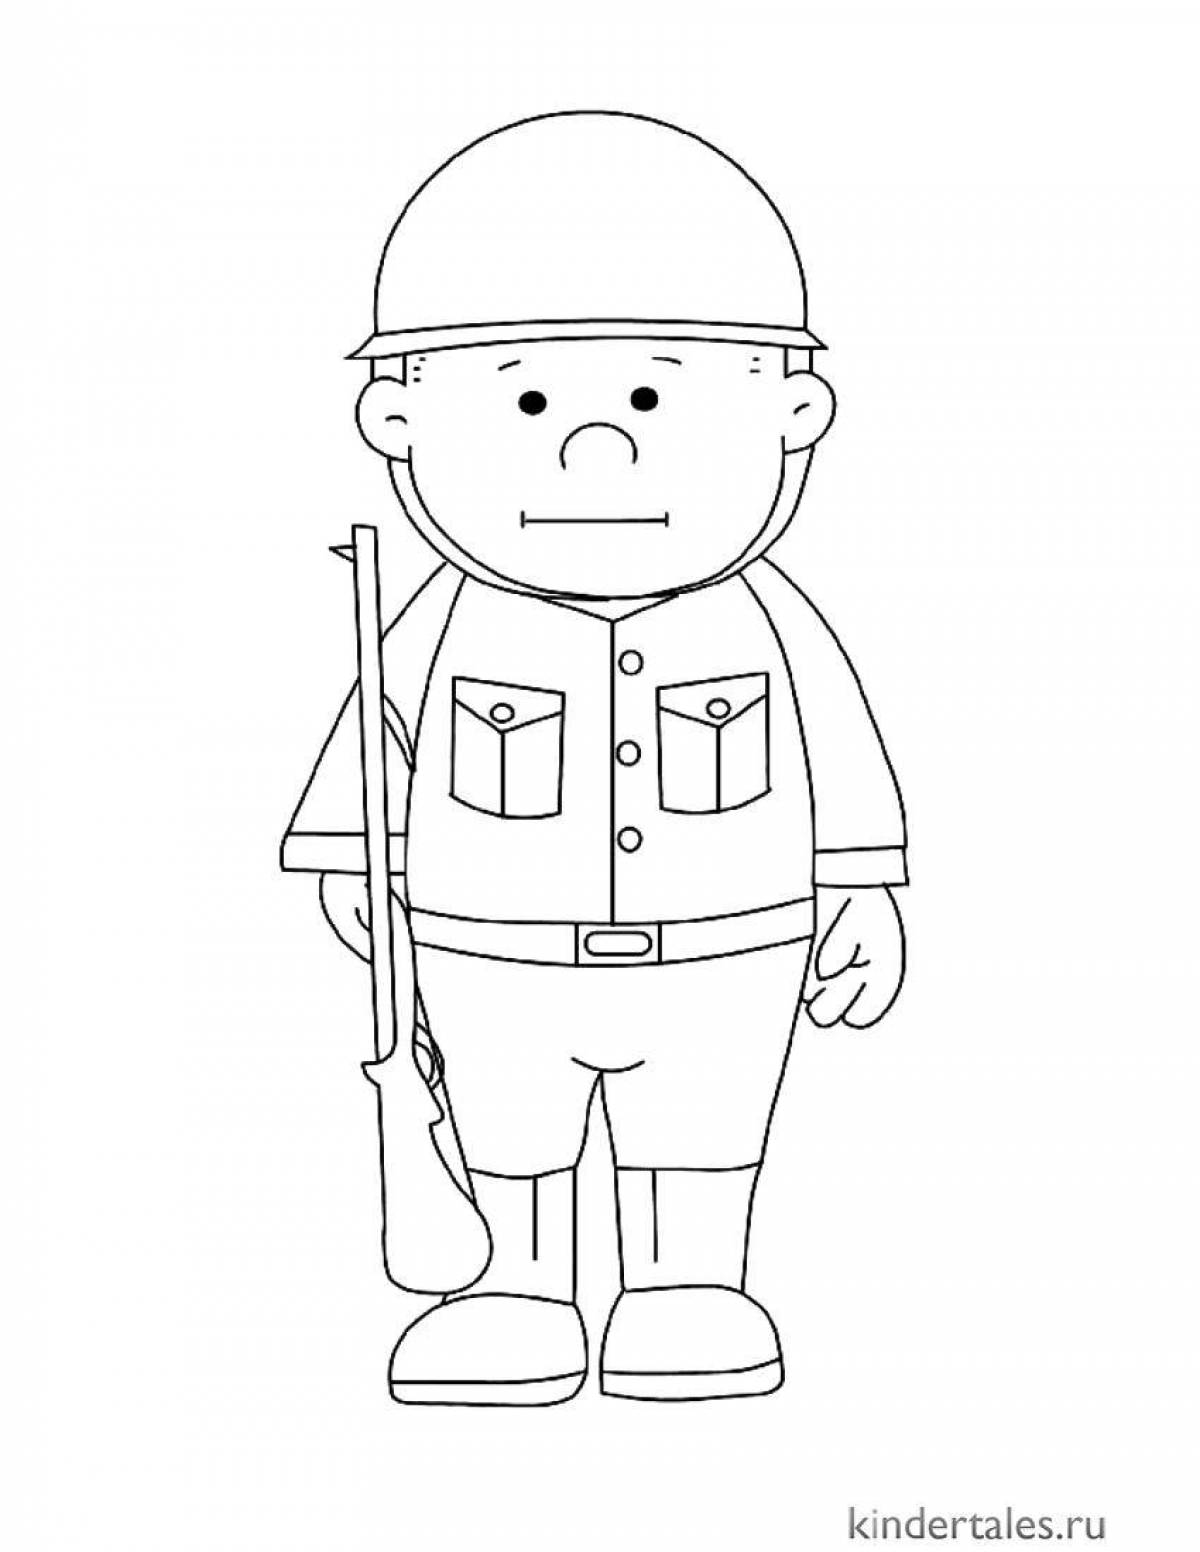 Colorful soldier coloring page 23 February